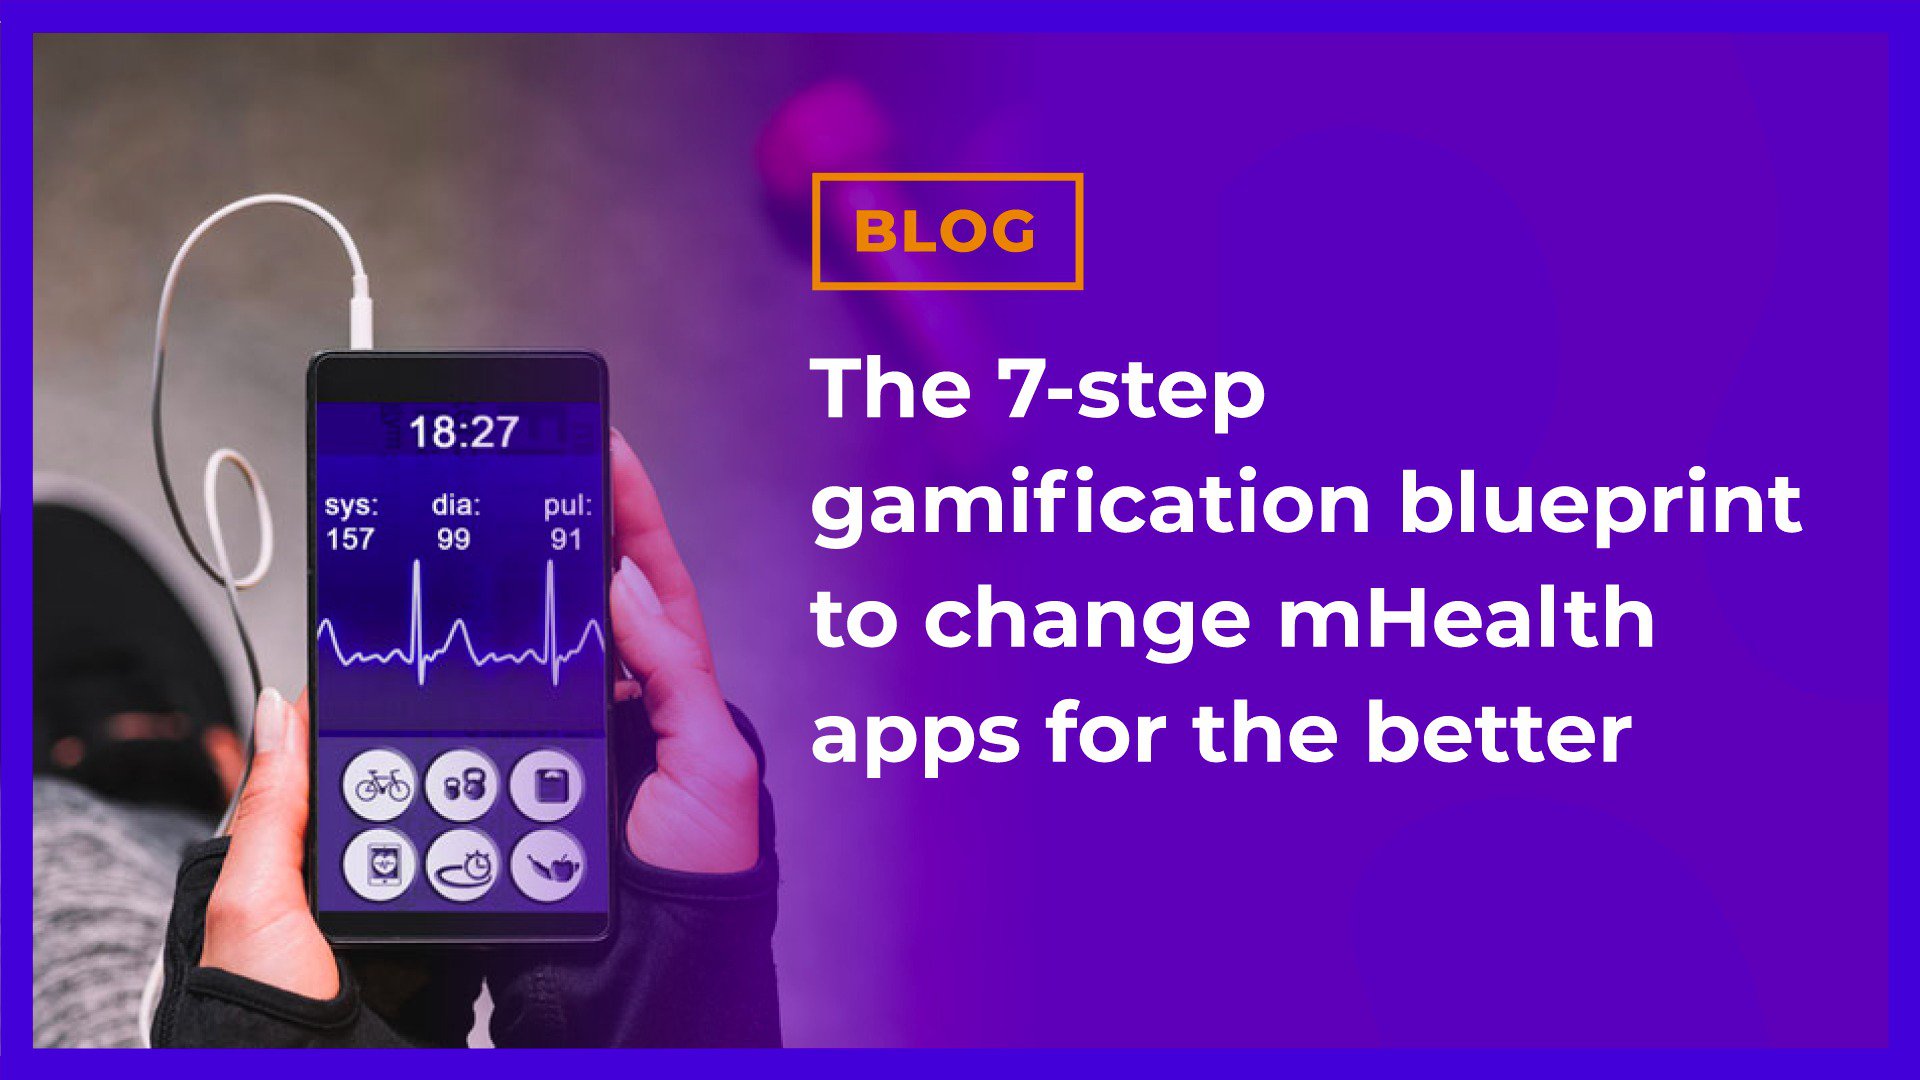 The 7-step gamification blueprint to change mHealth apps for the better